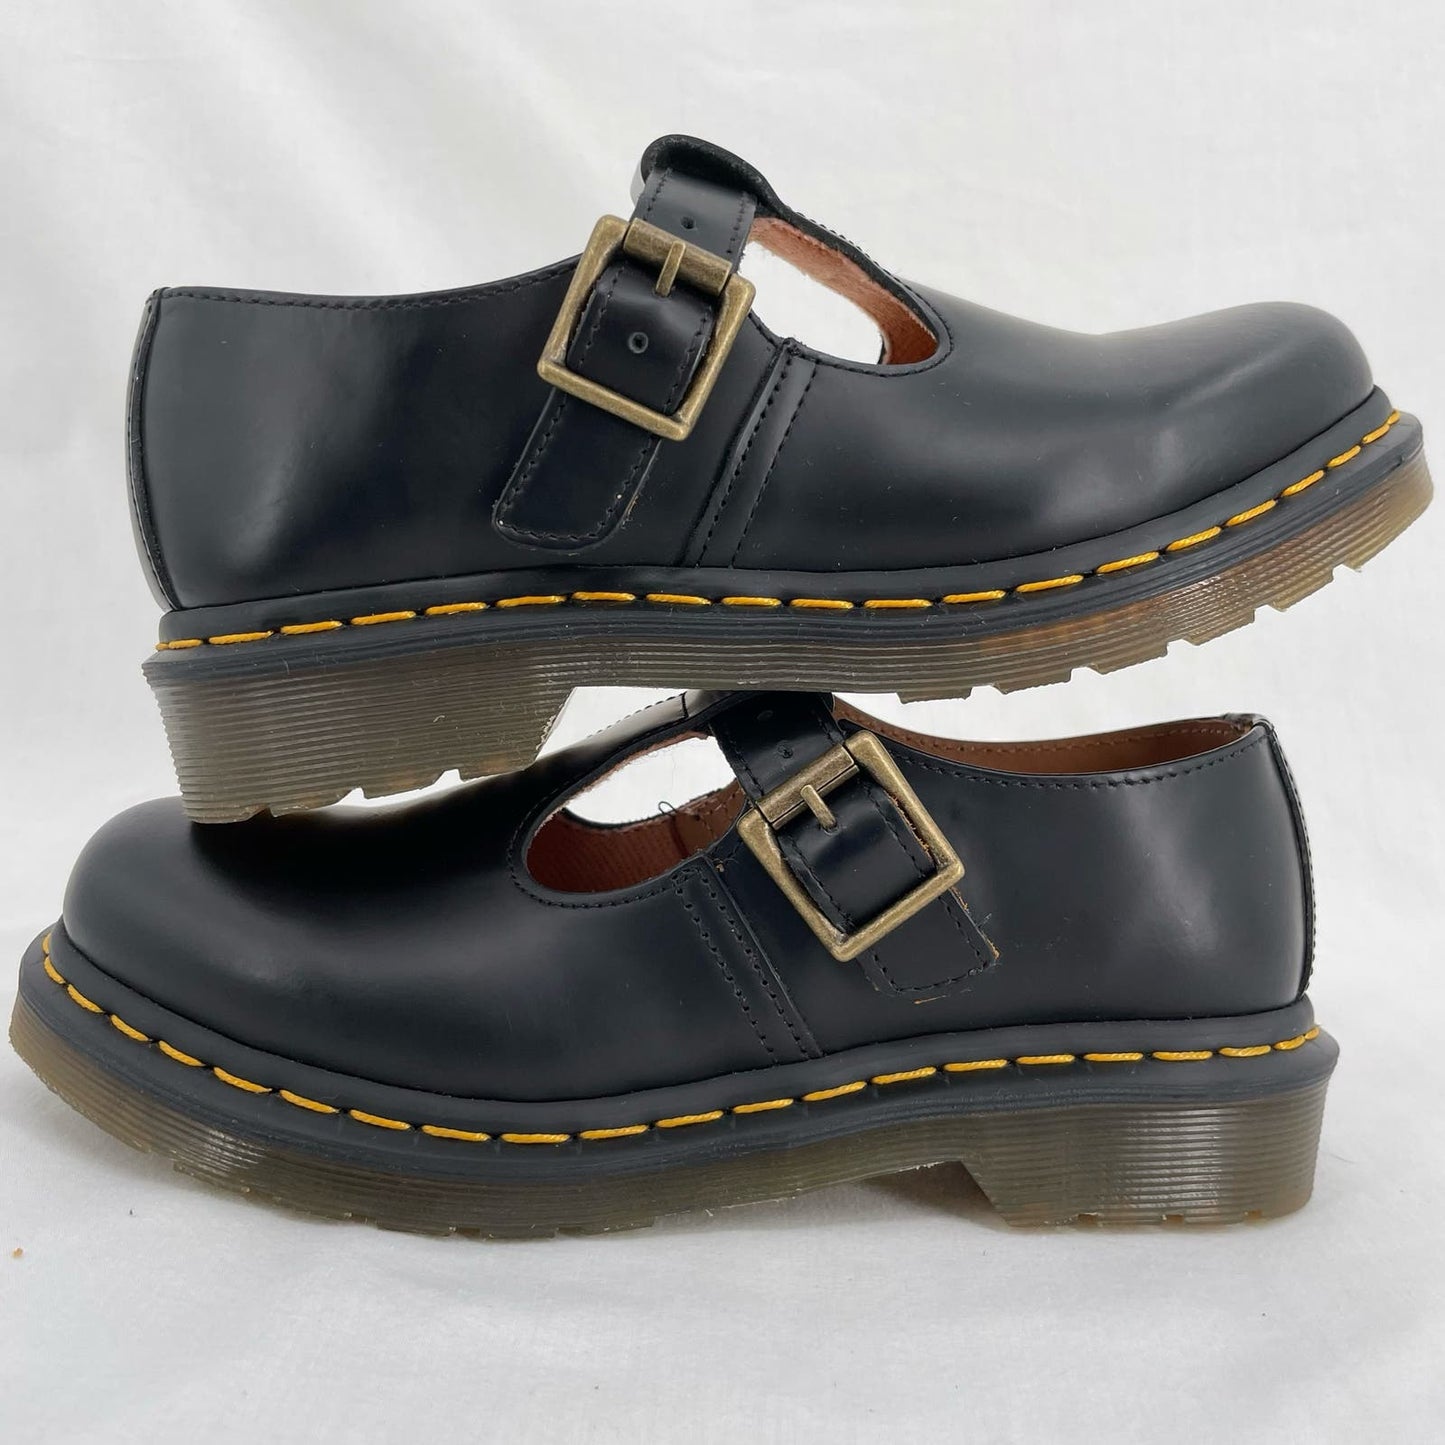 Dr. Martens Polley Mary Jane Black Smooth Leather Classic Academia Style Shoes Size 6